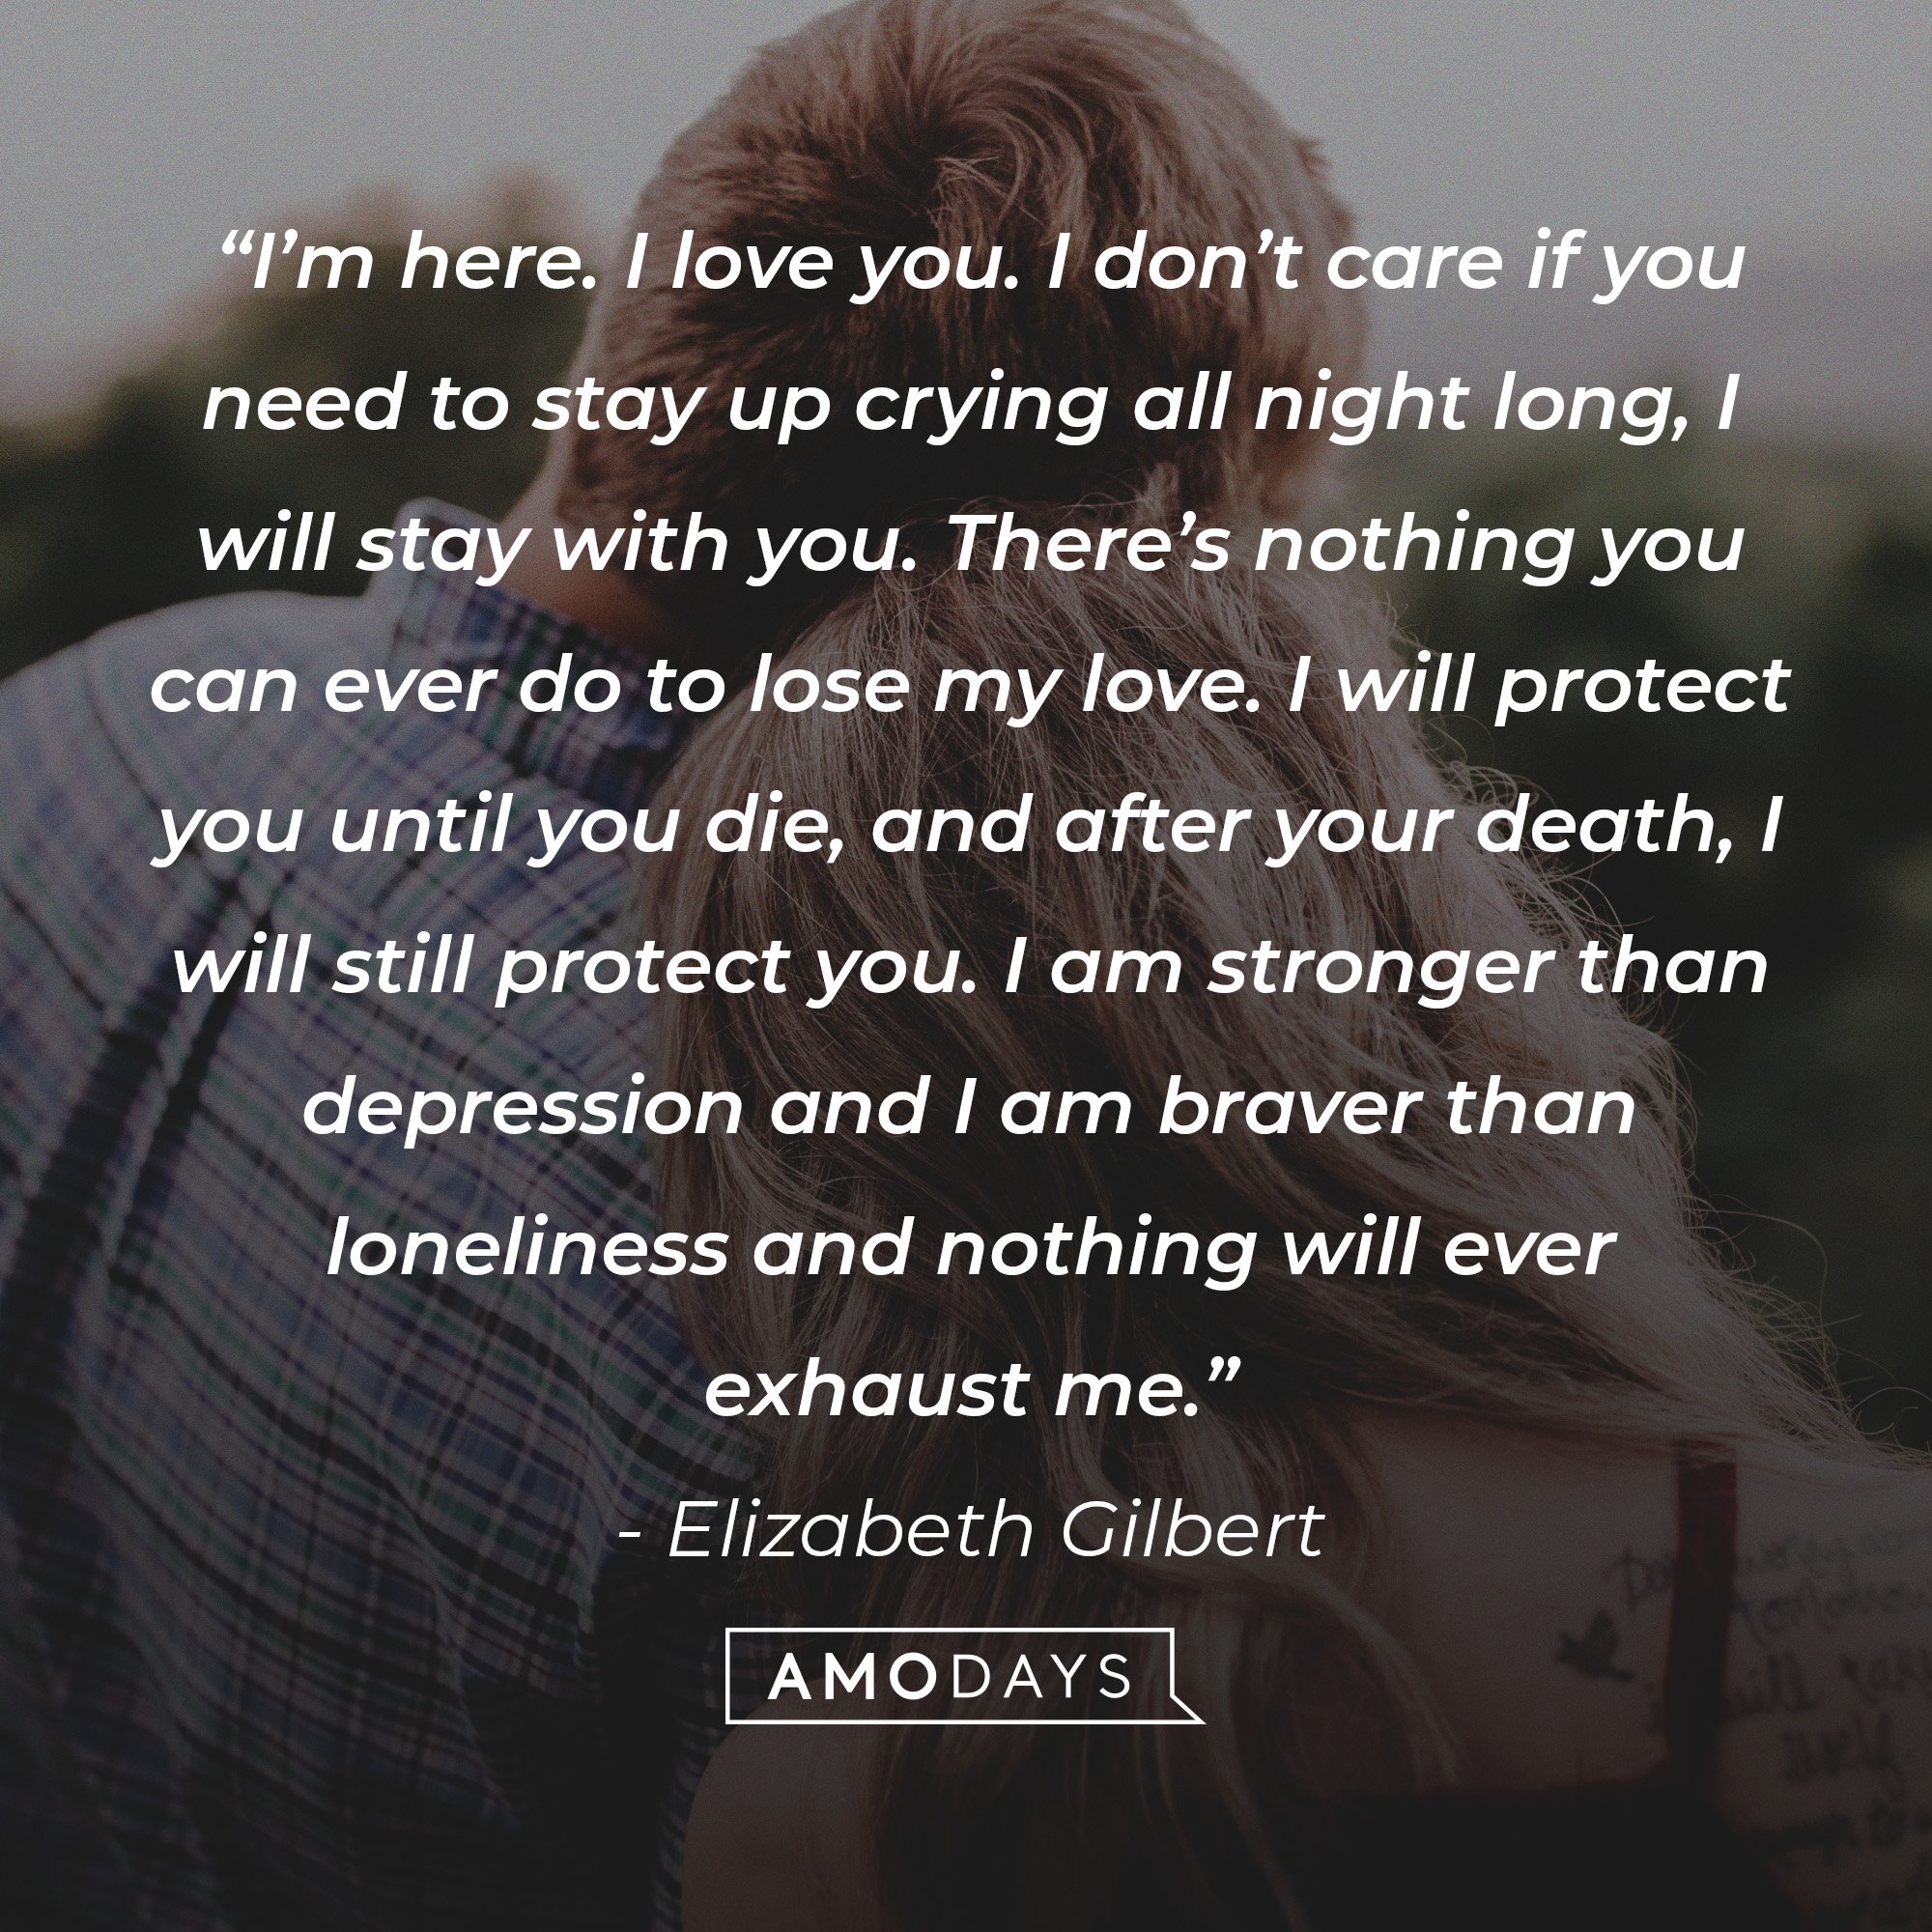 Elizabeth Gilbert's quote:  “I’m here. I love you. I don’t care if you need to stay up crying all night long, I will stay with you. There’s nothing you can ever do to lose my love. I will protect you until you die, and after your death, I will still protect you. I am stronger than depression and I am braver than loneliness and nothing will ever exhaust me.” | Image: AmoDays